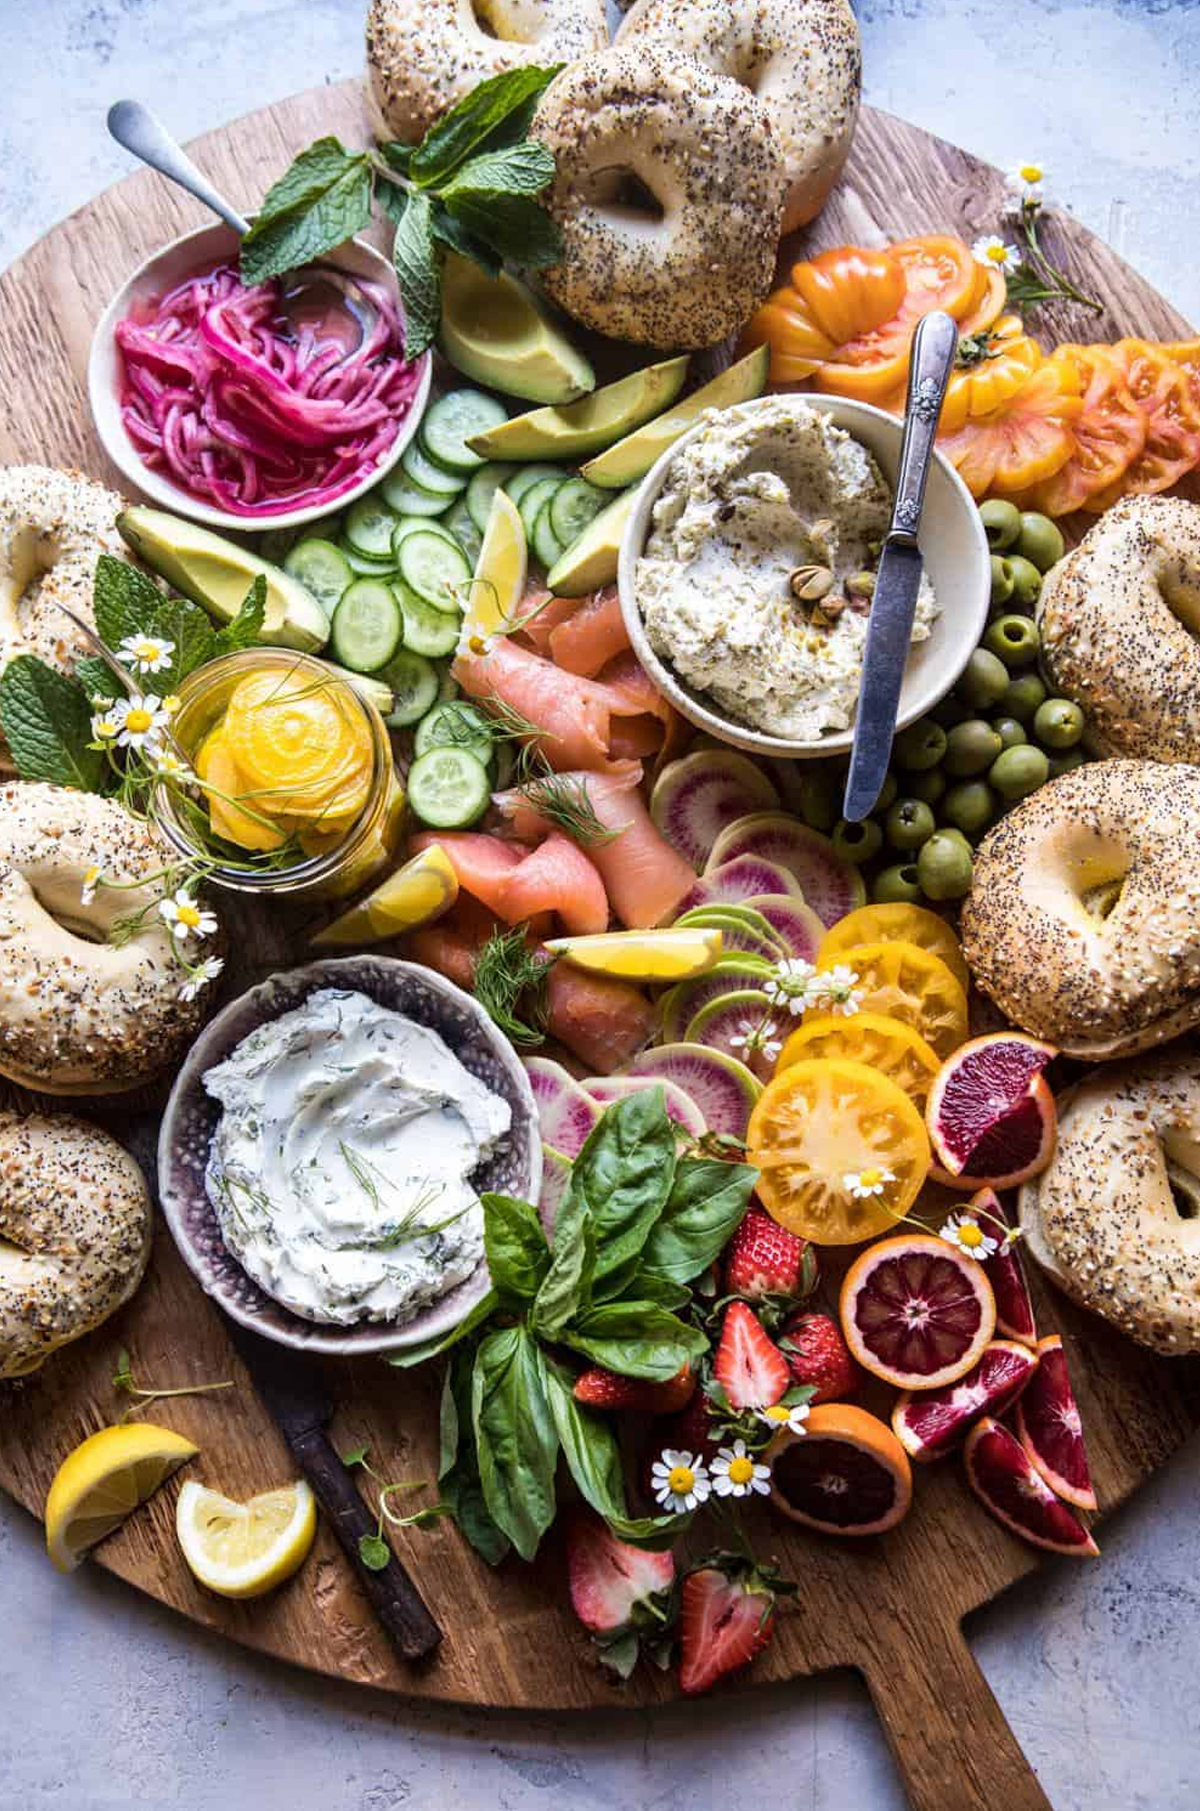 Bagels, smoked salmon, cream cheese, and red onions fill Half Baked Harvest's charcuterie board.